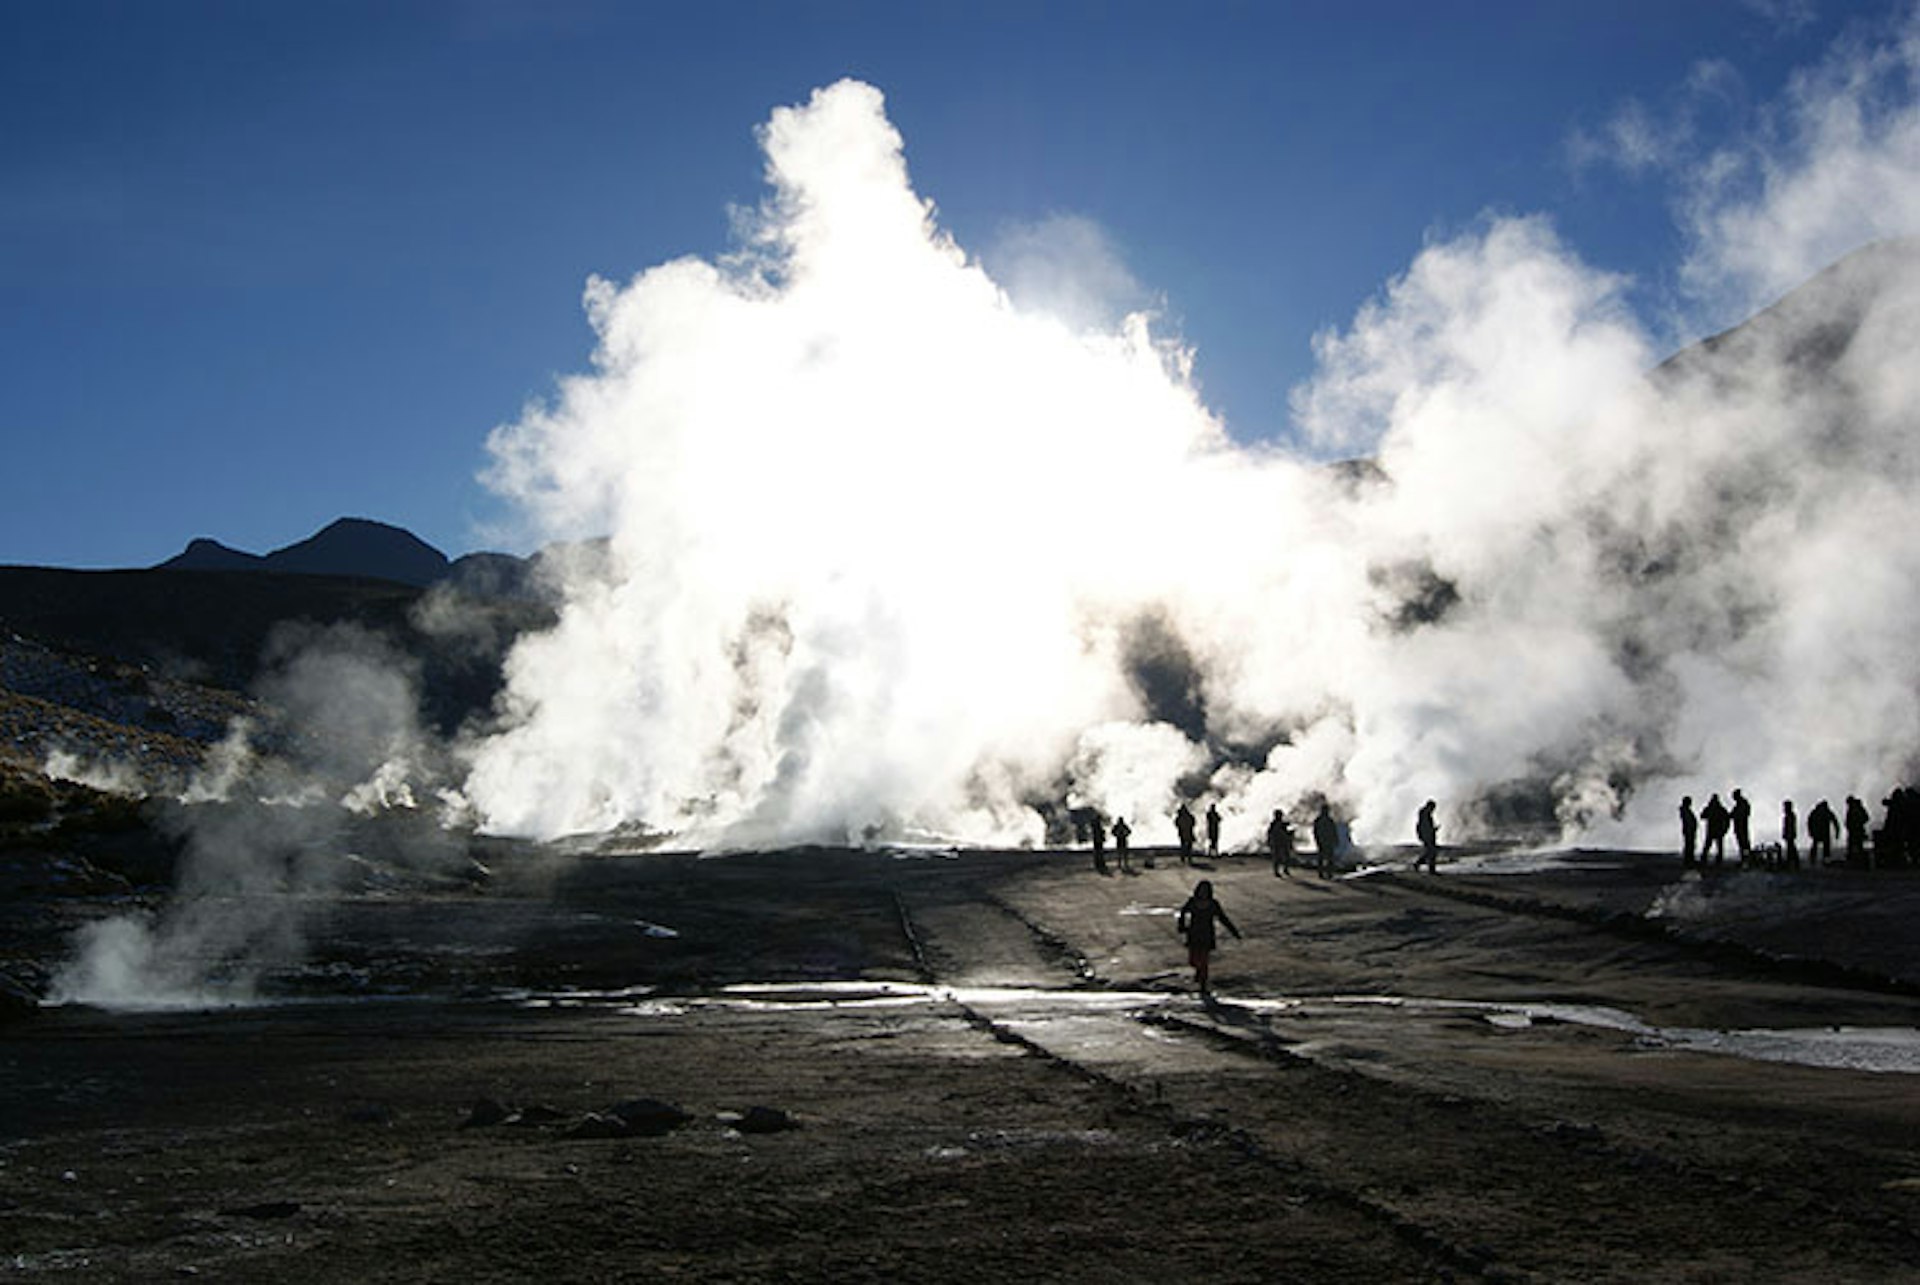 El Tatio geyser field. Image by Heather Carswell / Lonely Planet